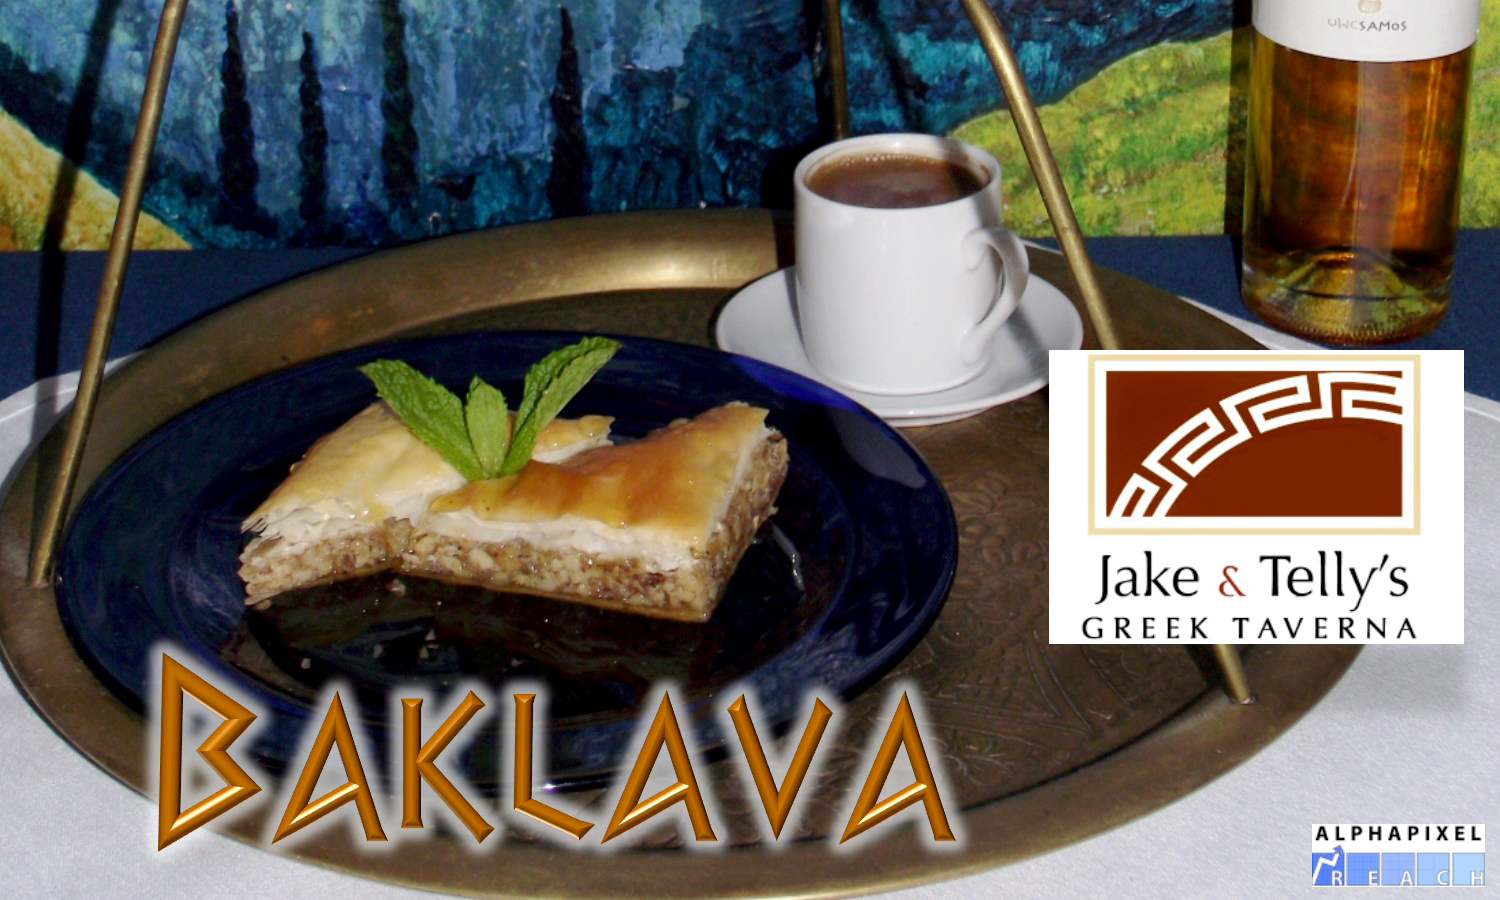 Dessert at Jake and Telly's, Close up of Baklava on a blue plate and Greek coffee in a white demitasse cup. Both are on a brass serving tray. "Baklava" is written in gold Ancient Greek style letters and a Red Jake and Telly's logo on the Right of the photo. tha AlphaPixel Reach logo is in the lower right hand corner